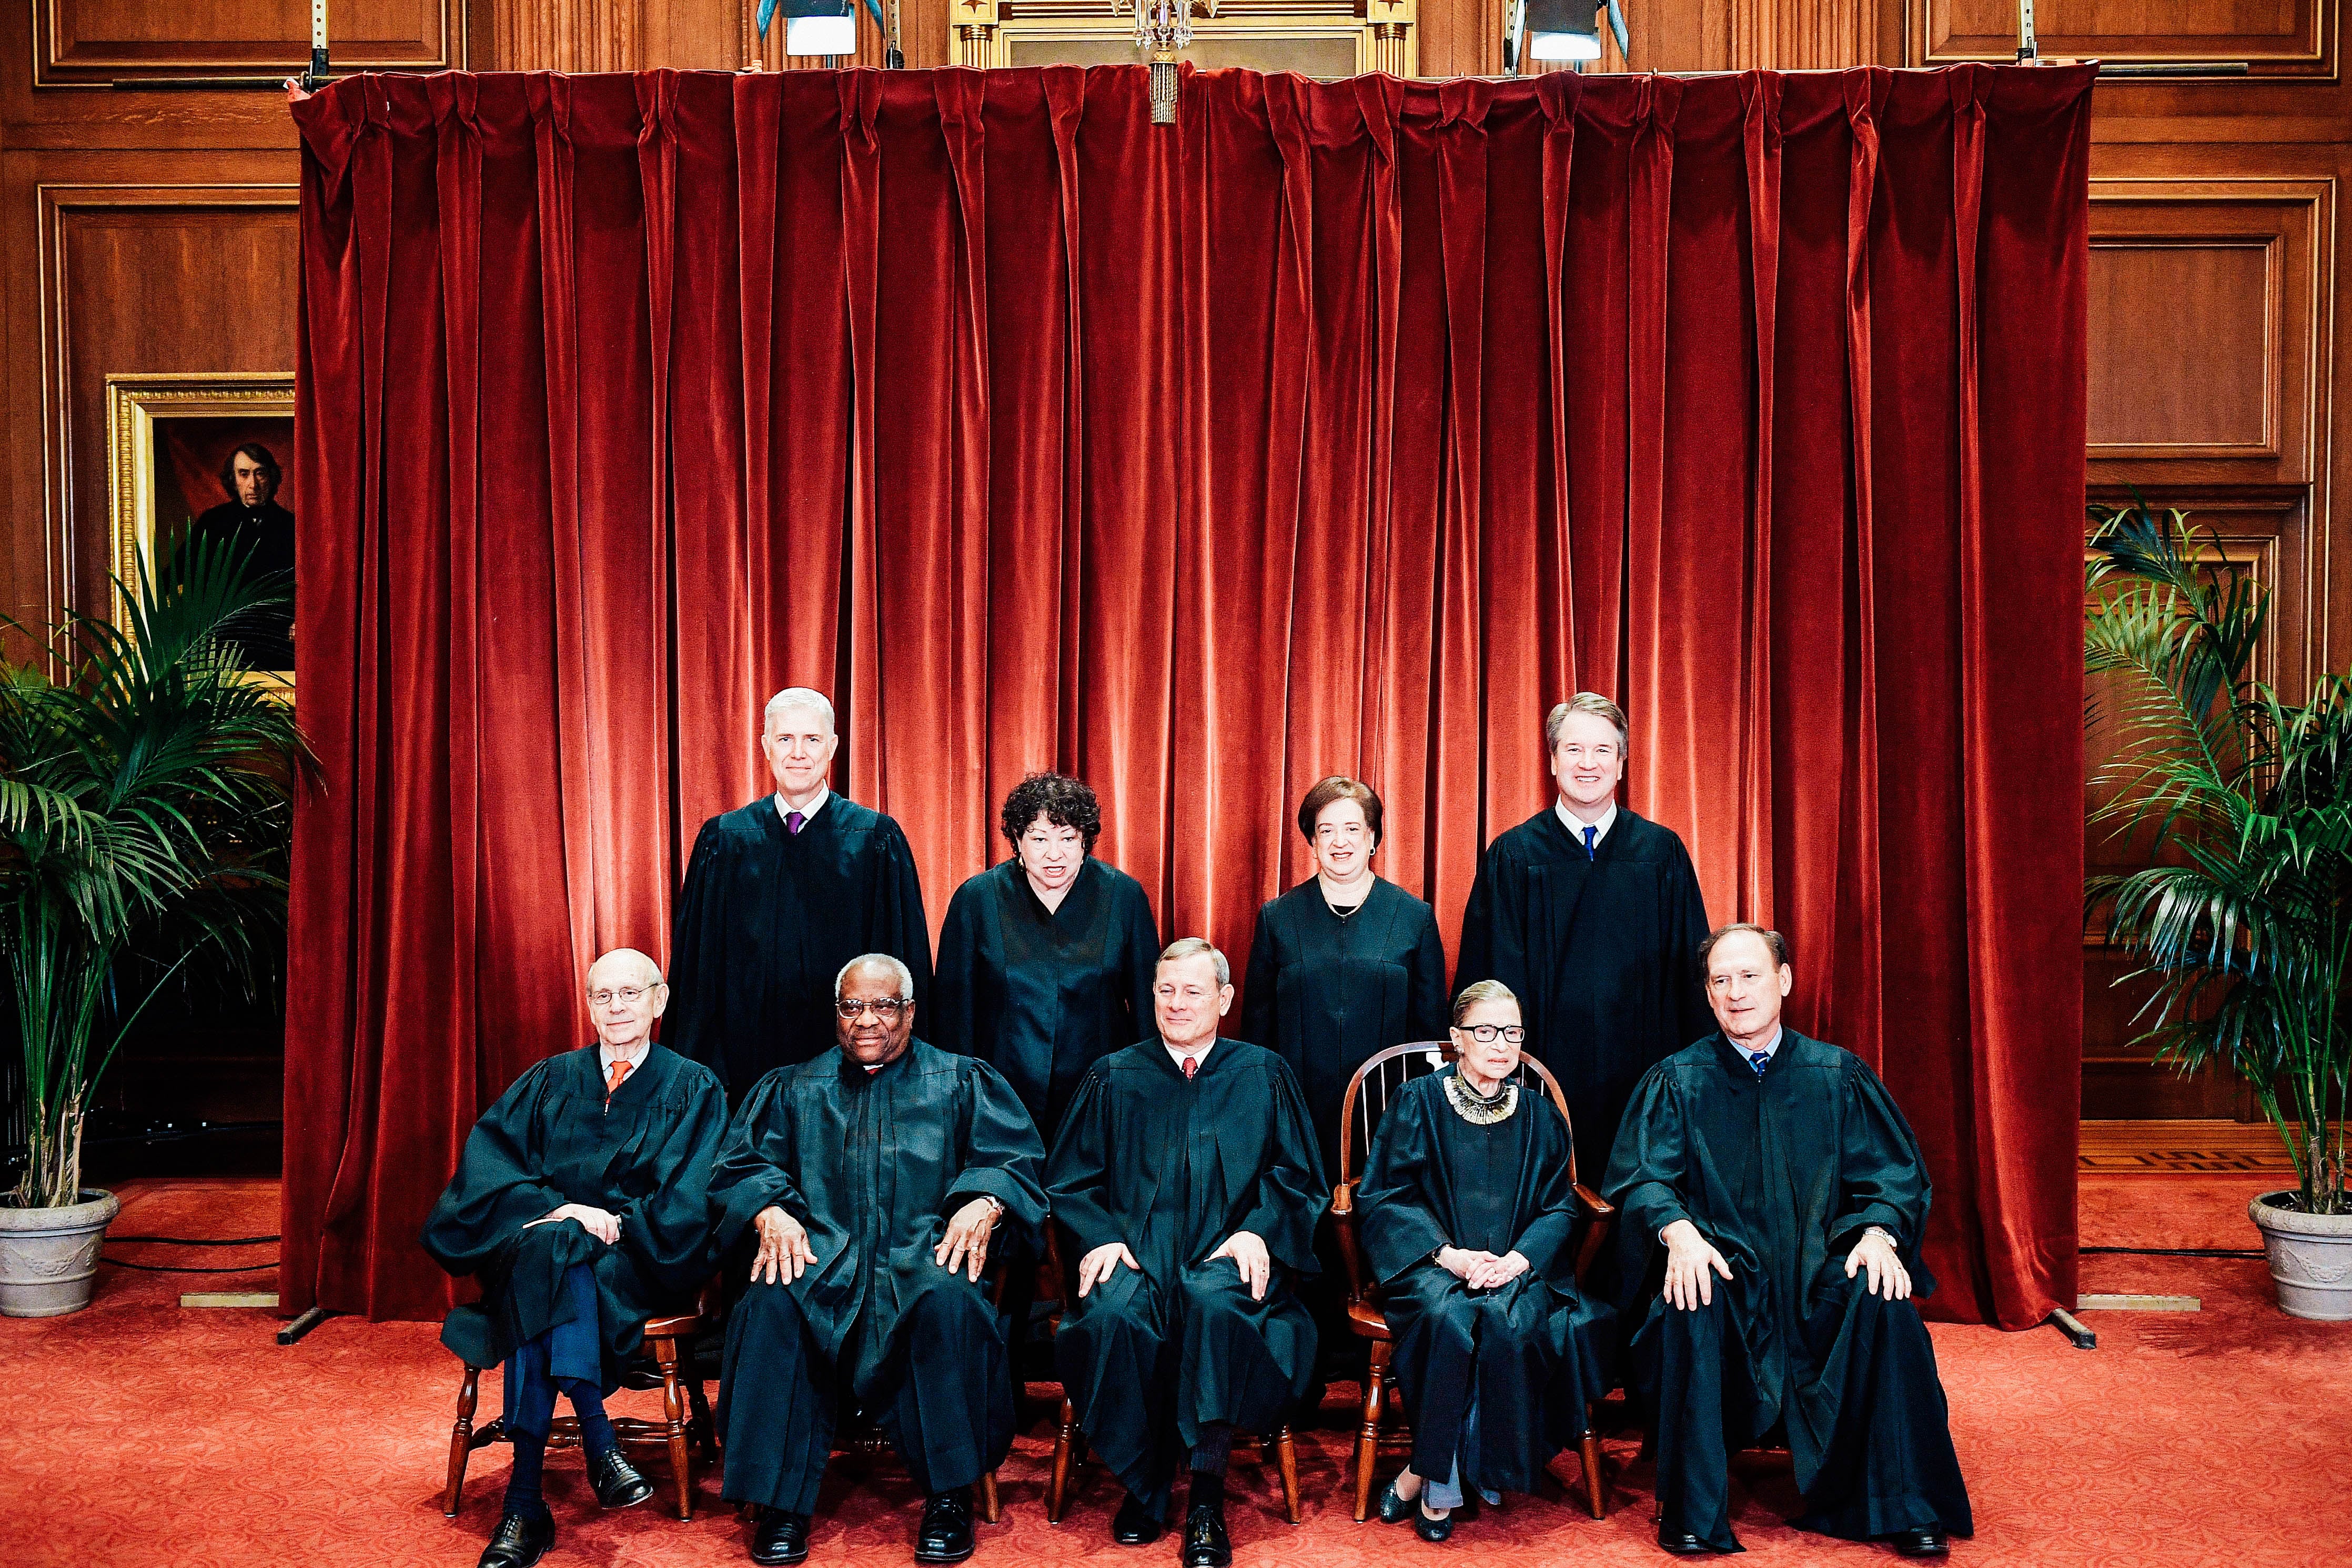 Justices of the Supreme Court pose for their official photo.